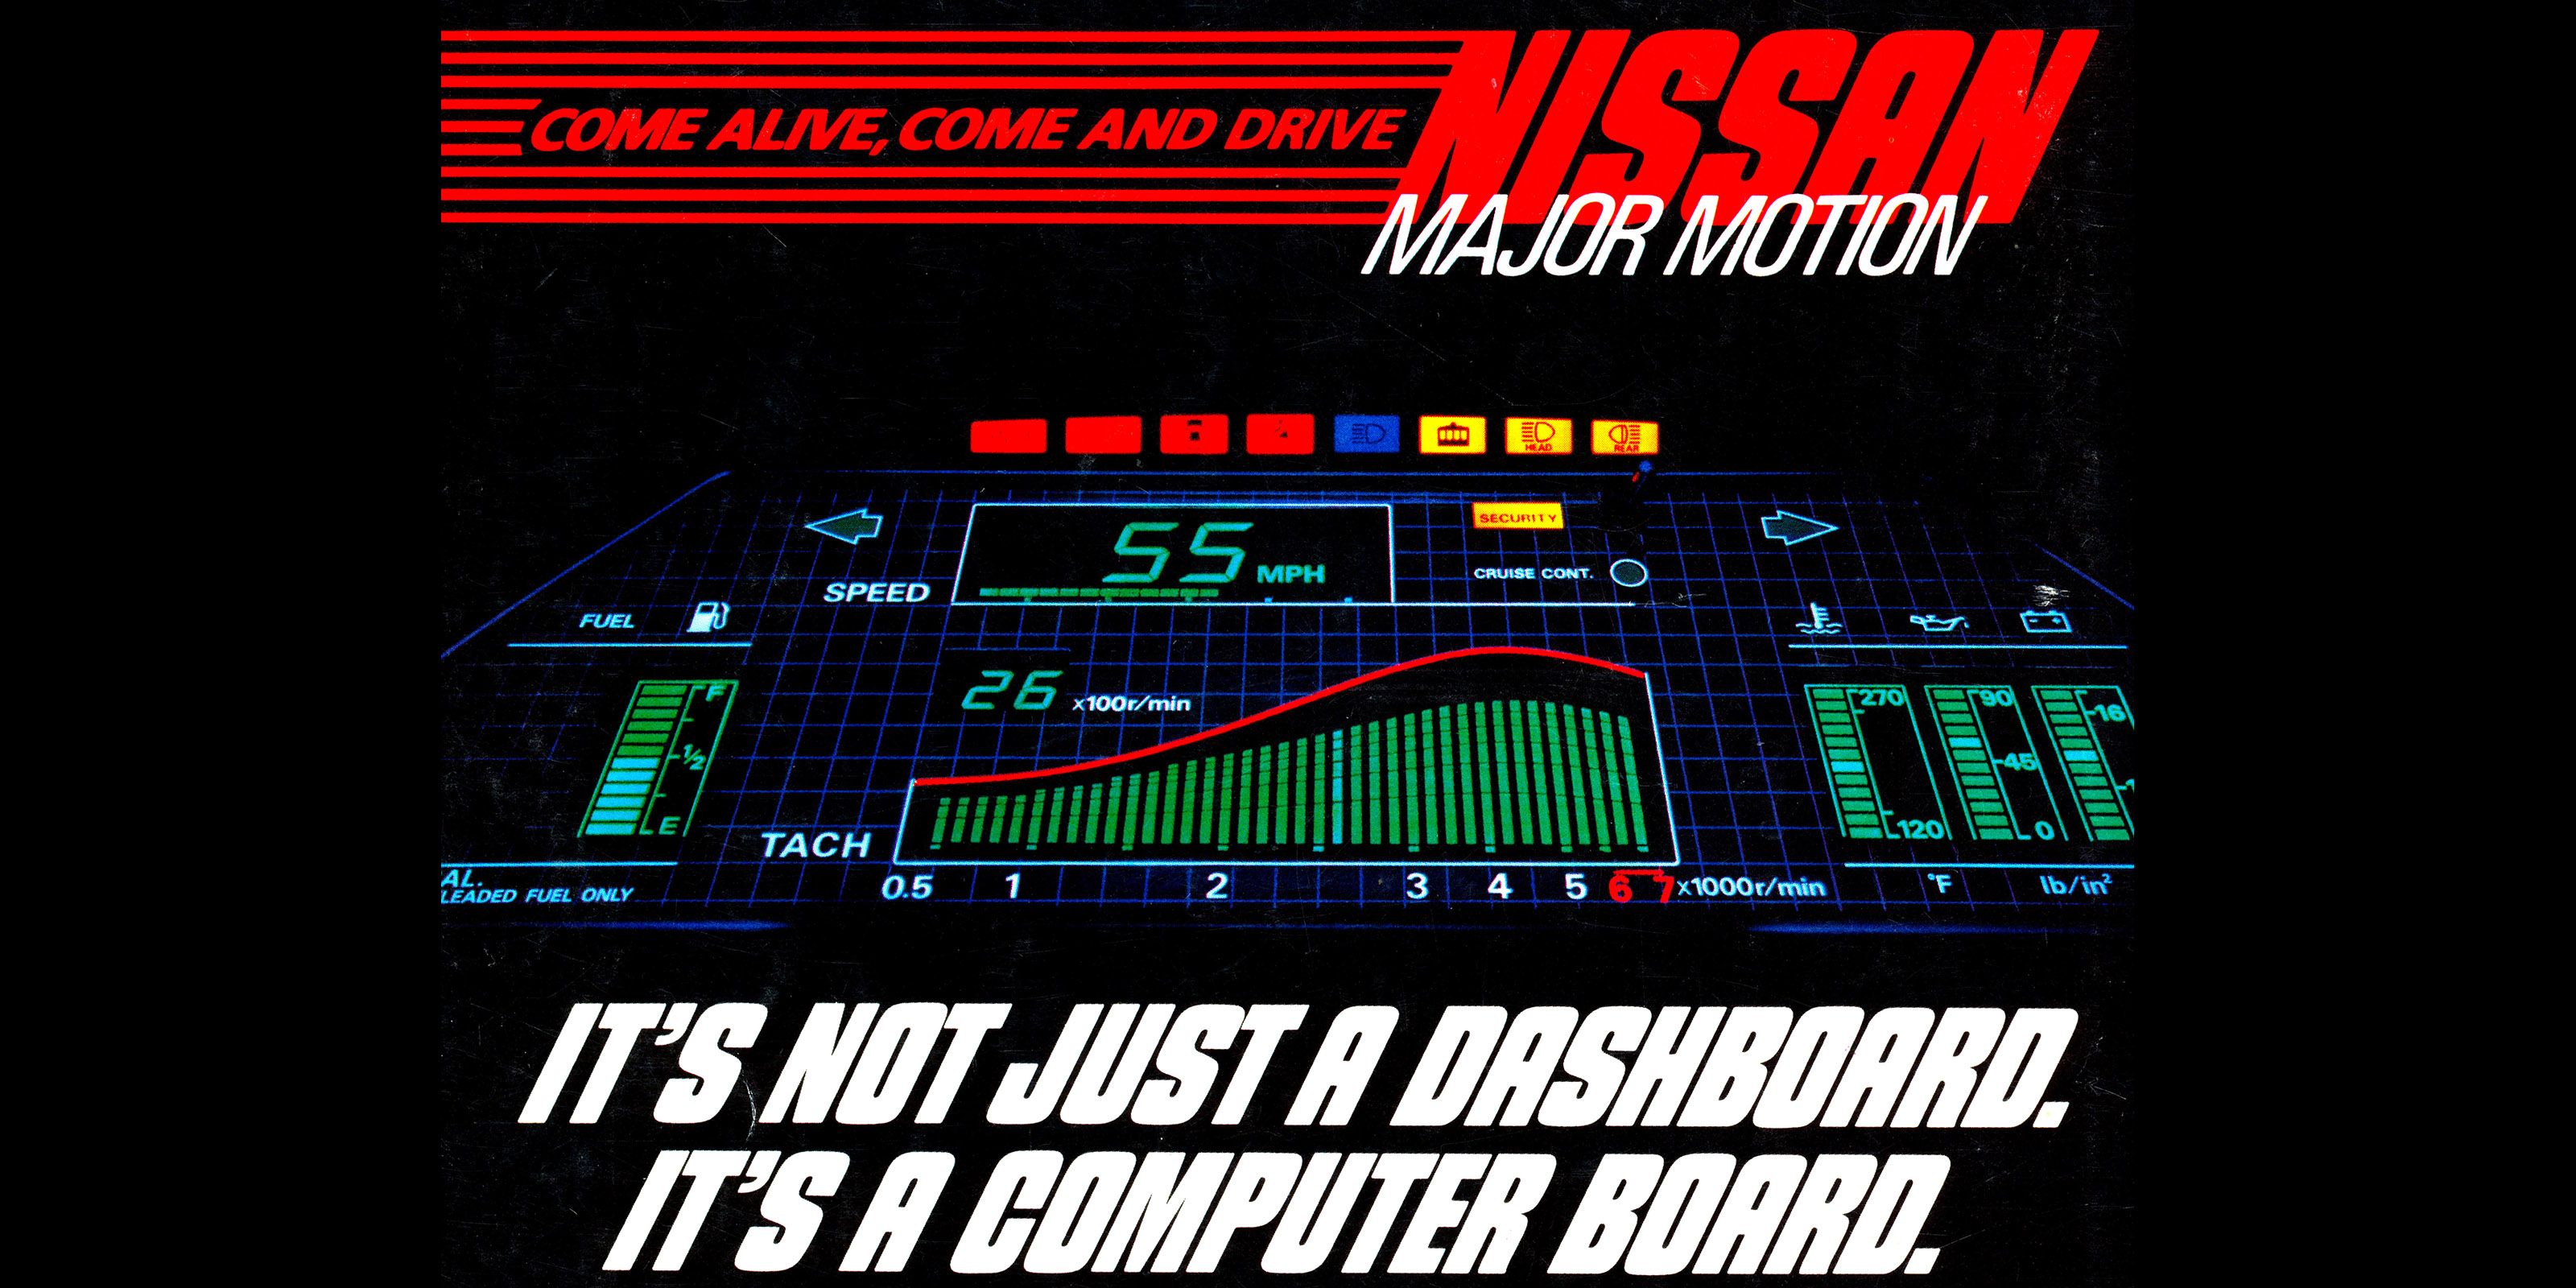 1985 Nissan 300ZX's Digital Dash Displays All but Your Passenger's Age